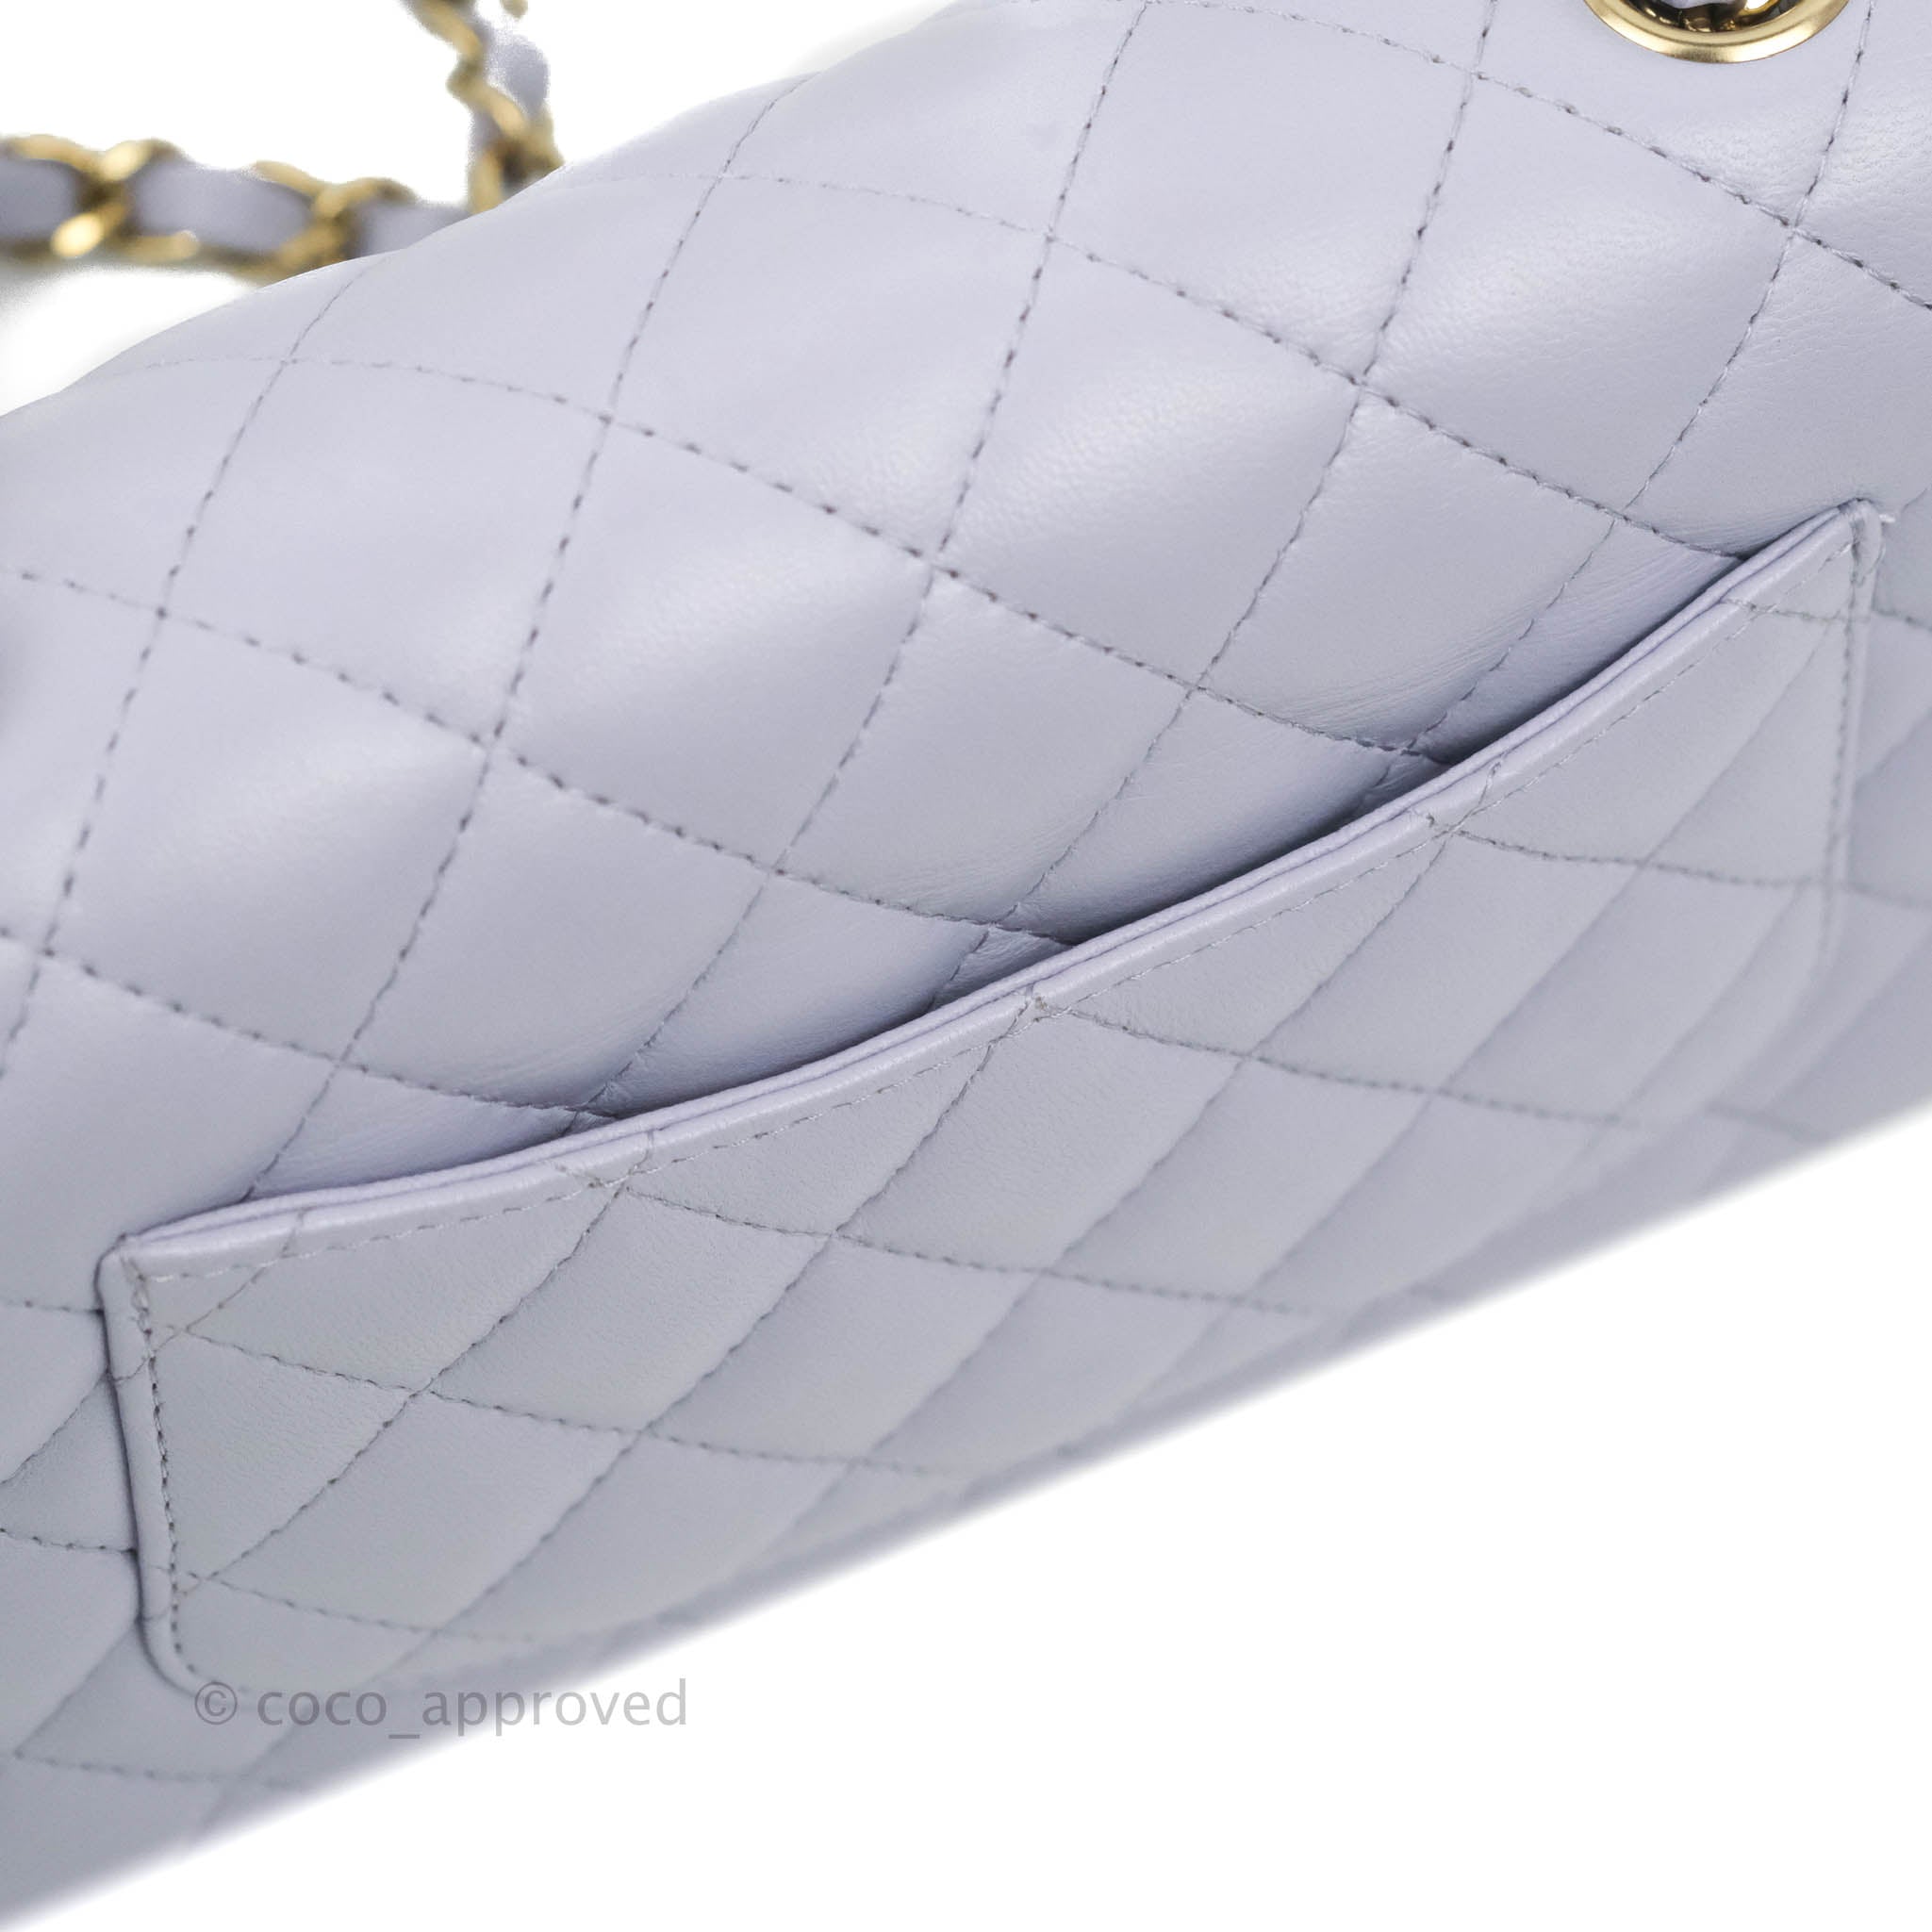 Chanel Light Blue Quilted Lambskin Imitation Pearl Chain Micro Bag Silver Hardware, 2021 (Very Good)